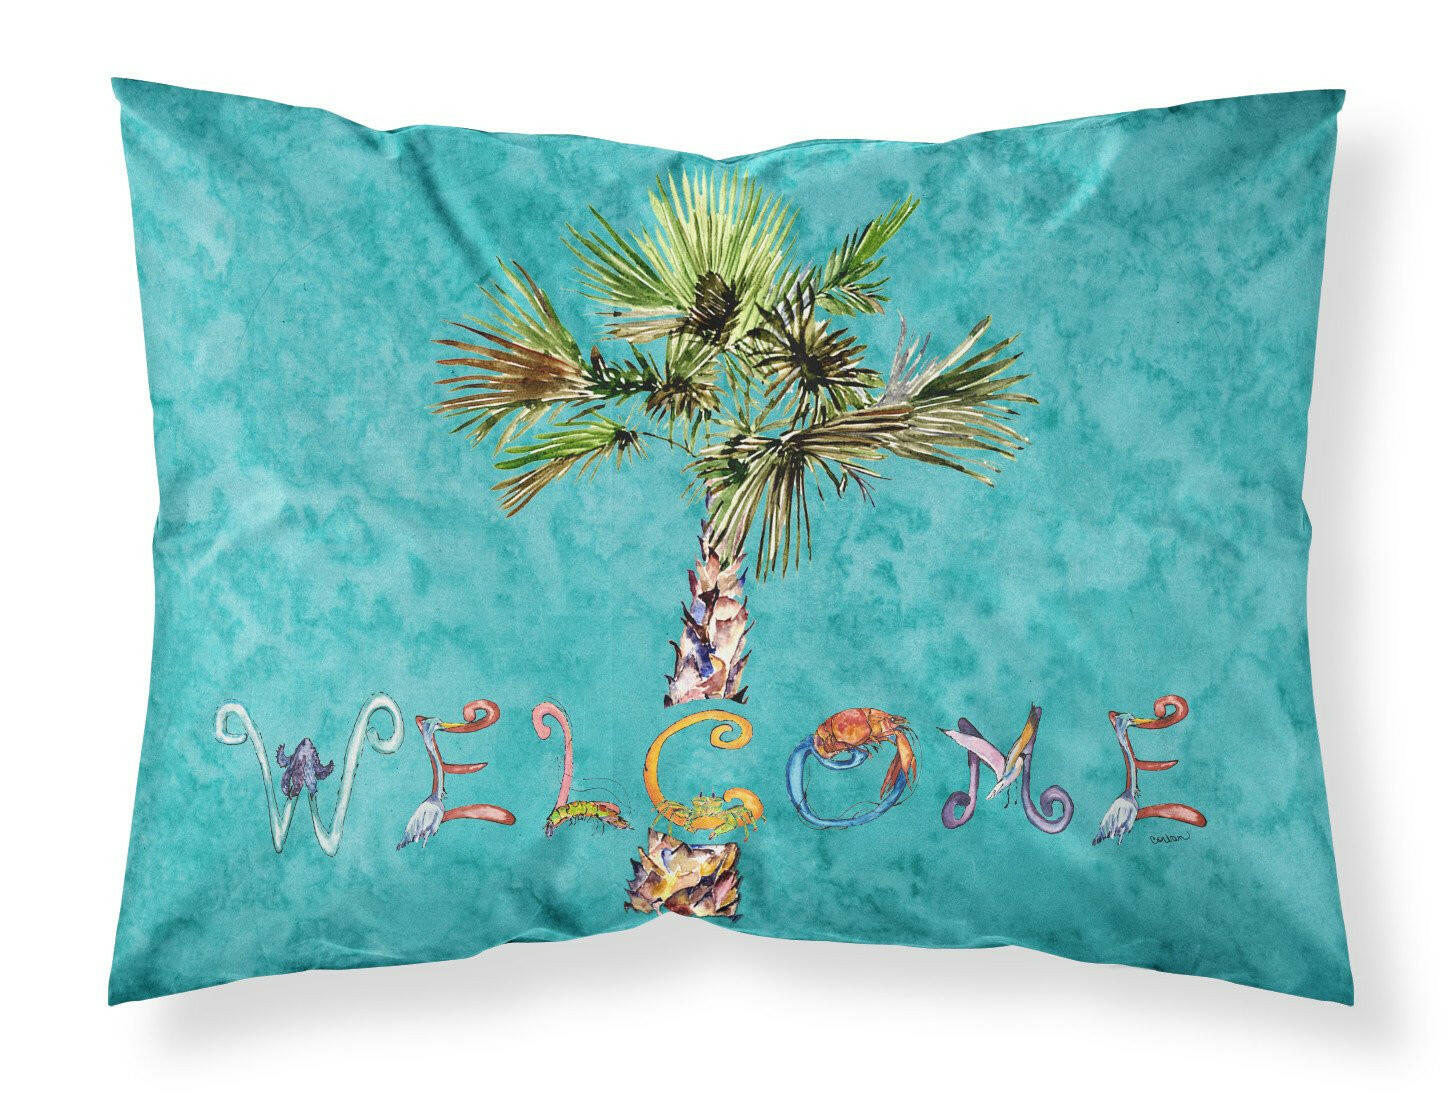 Welcome Palm Tree on Teal Fabric Standard Pillowcase 8711PILLOWCASE by Caroline's Treasures